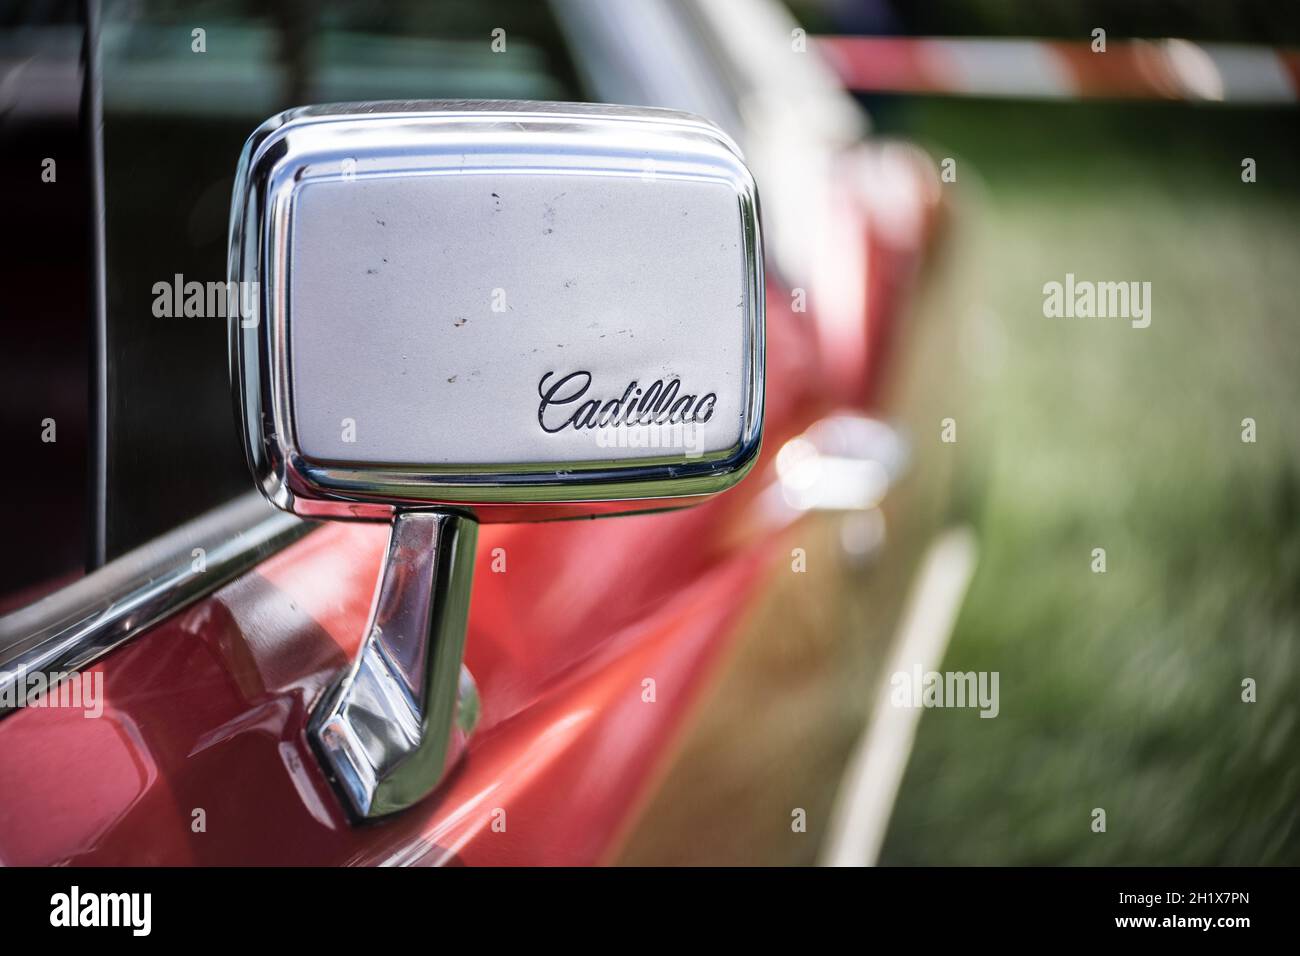 DIEDERSDORF, GERMANY - AUGUST 21, 2021: The rear view mirror of a full-size luxury car Cadillac de Ville. The exhibition of 'US Car Classics'. Stock Photo